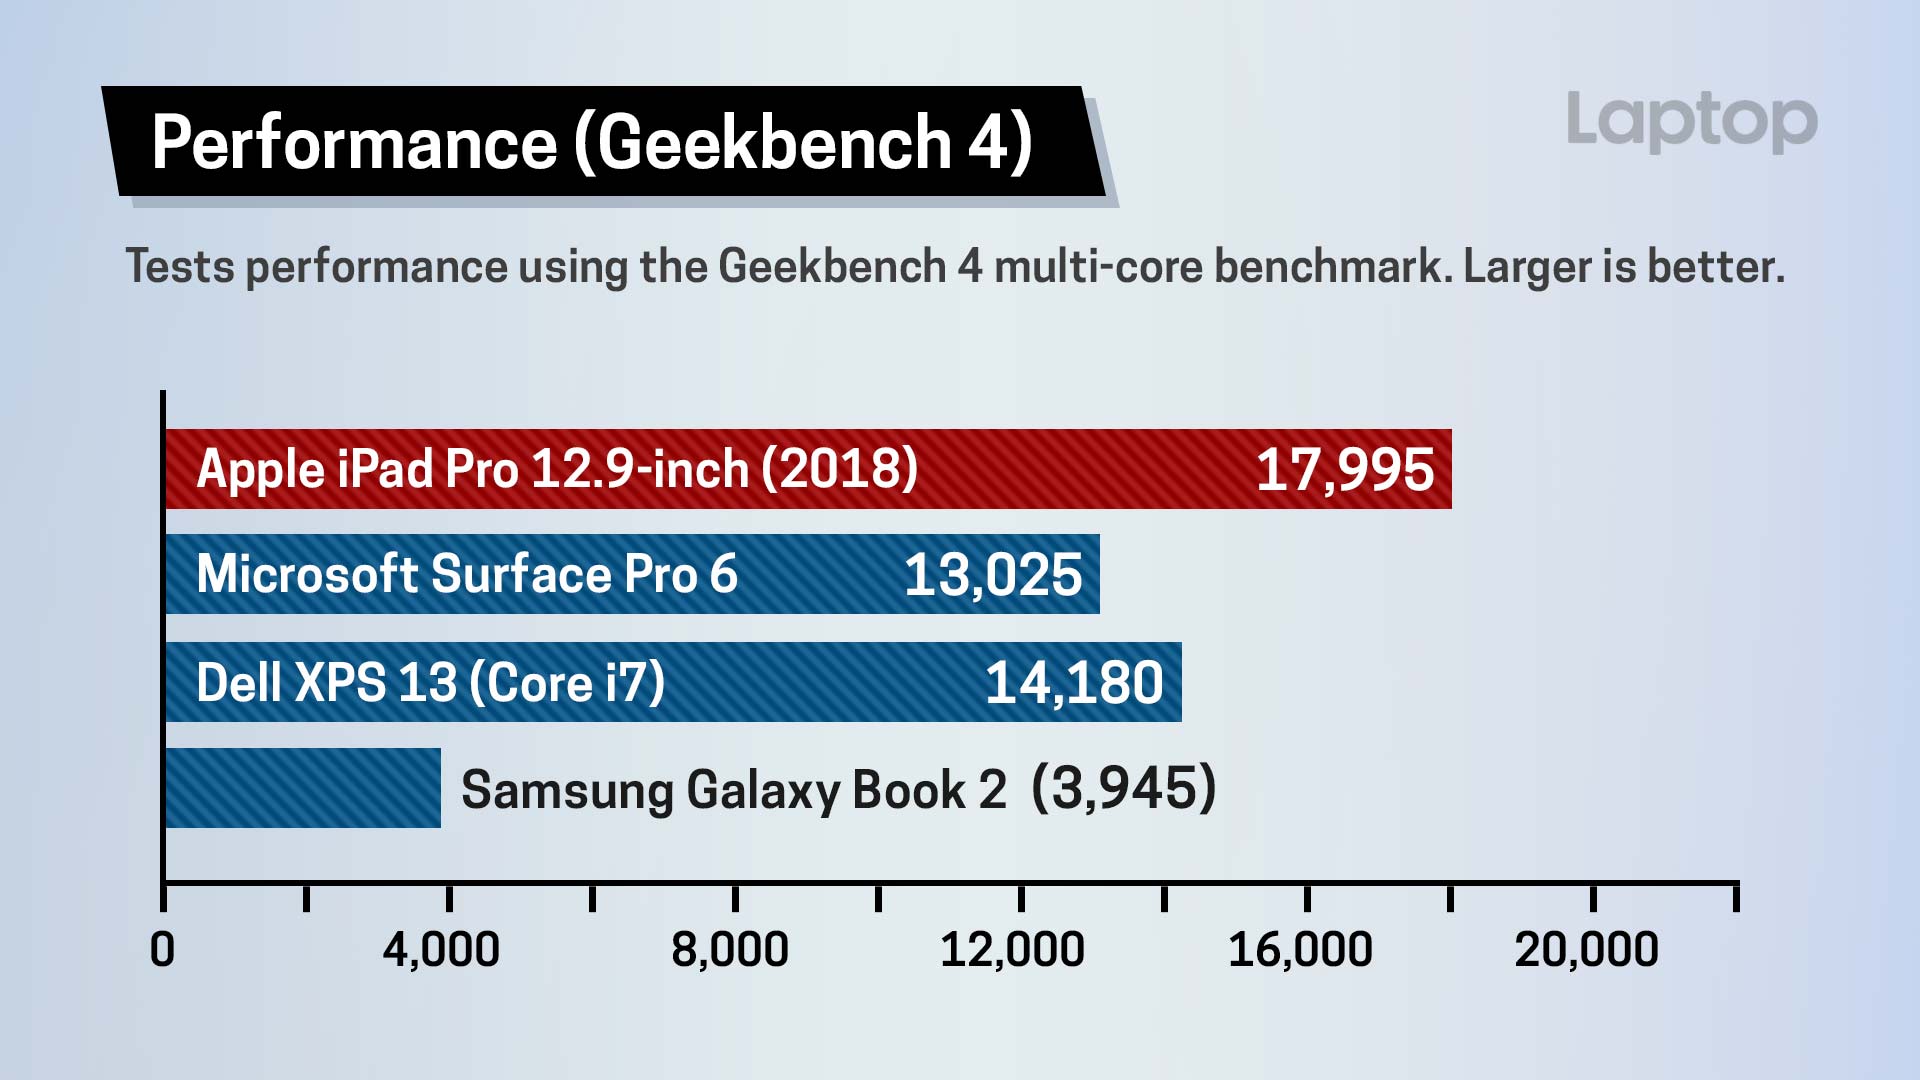 Geekbench 4 test of the new iPad Pro